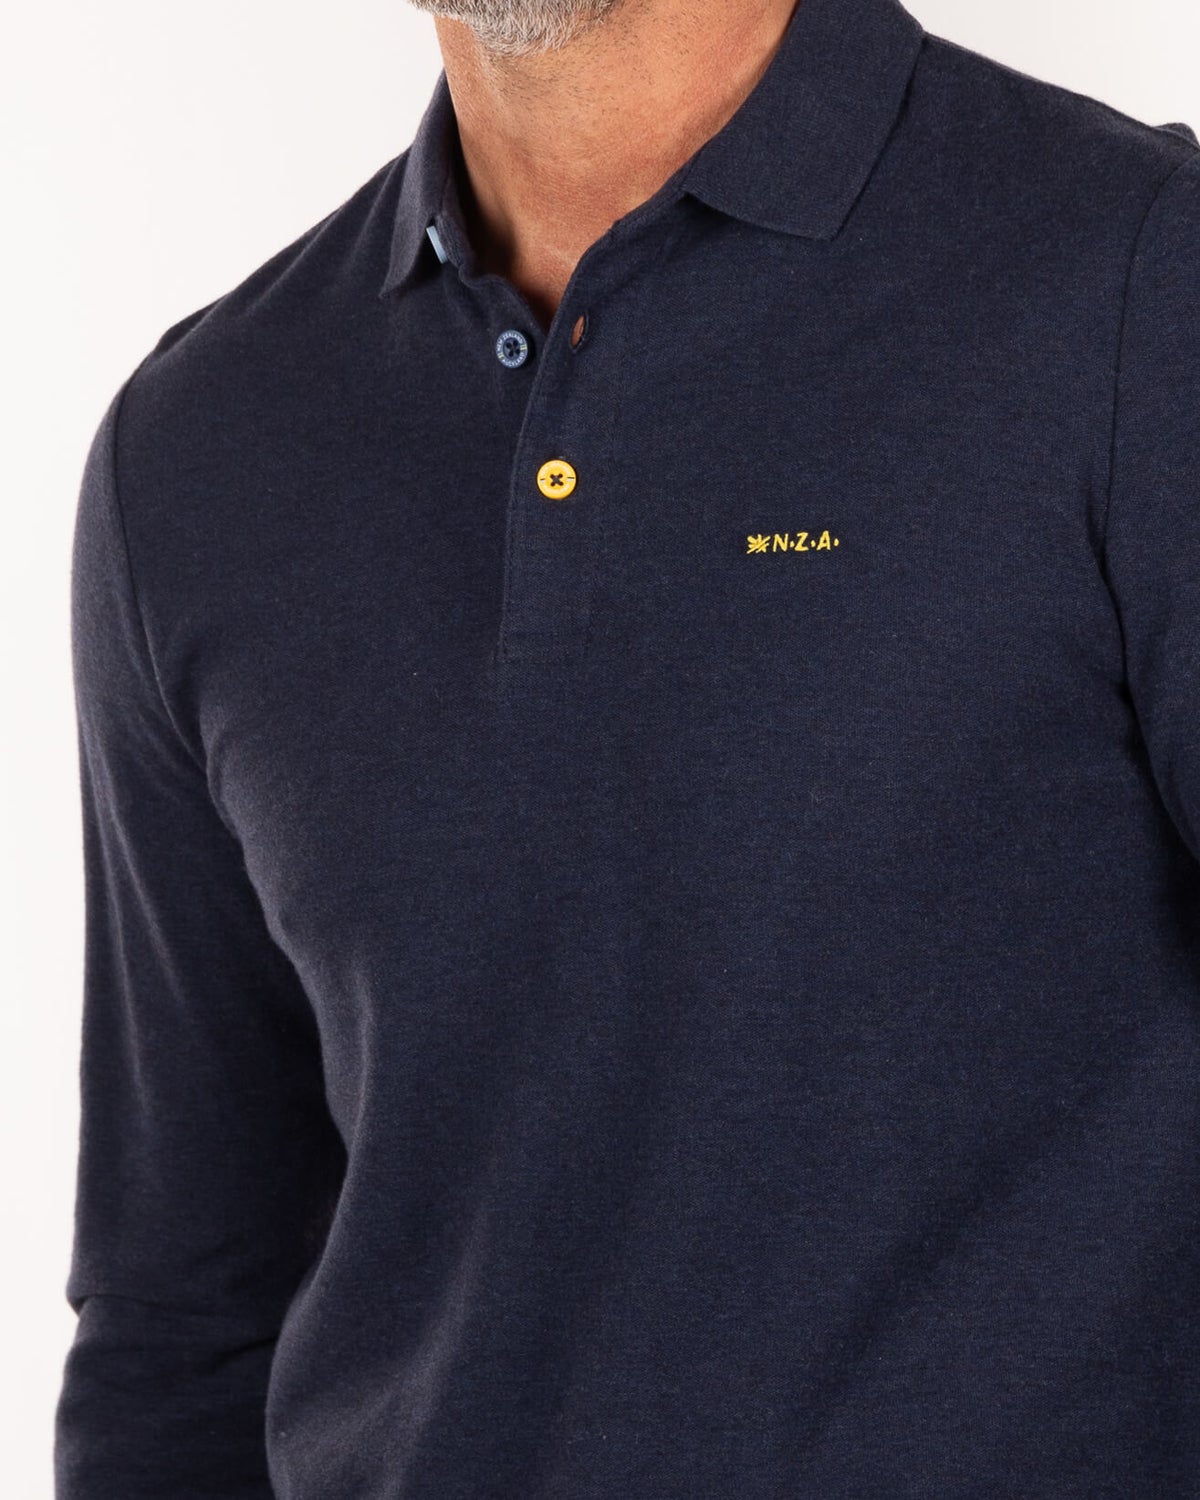 Solid coloured cotton rugby shirt - Charcoal Navy